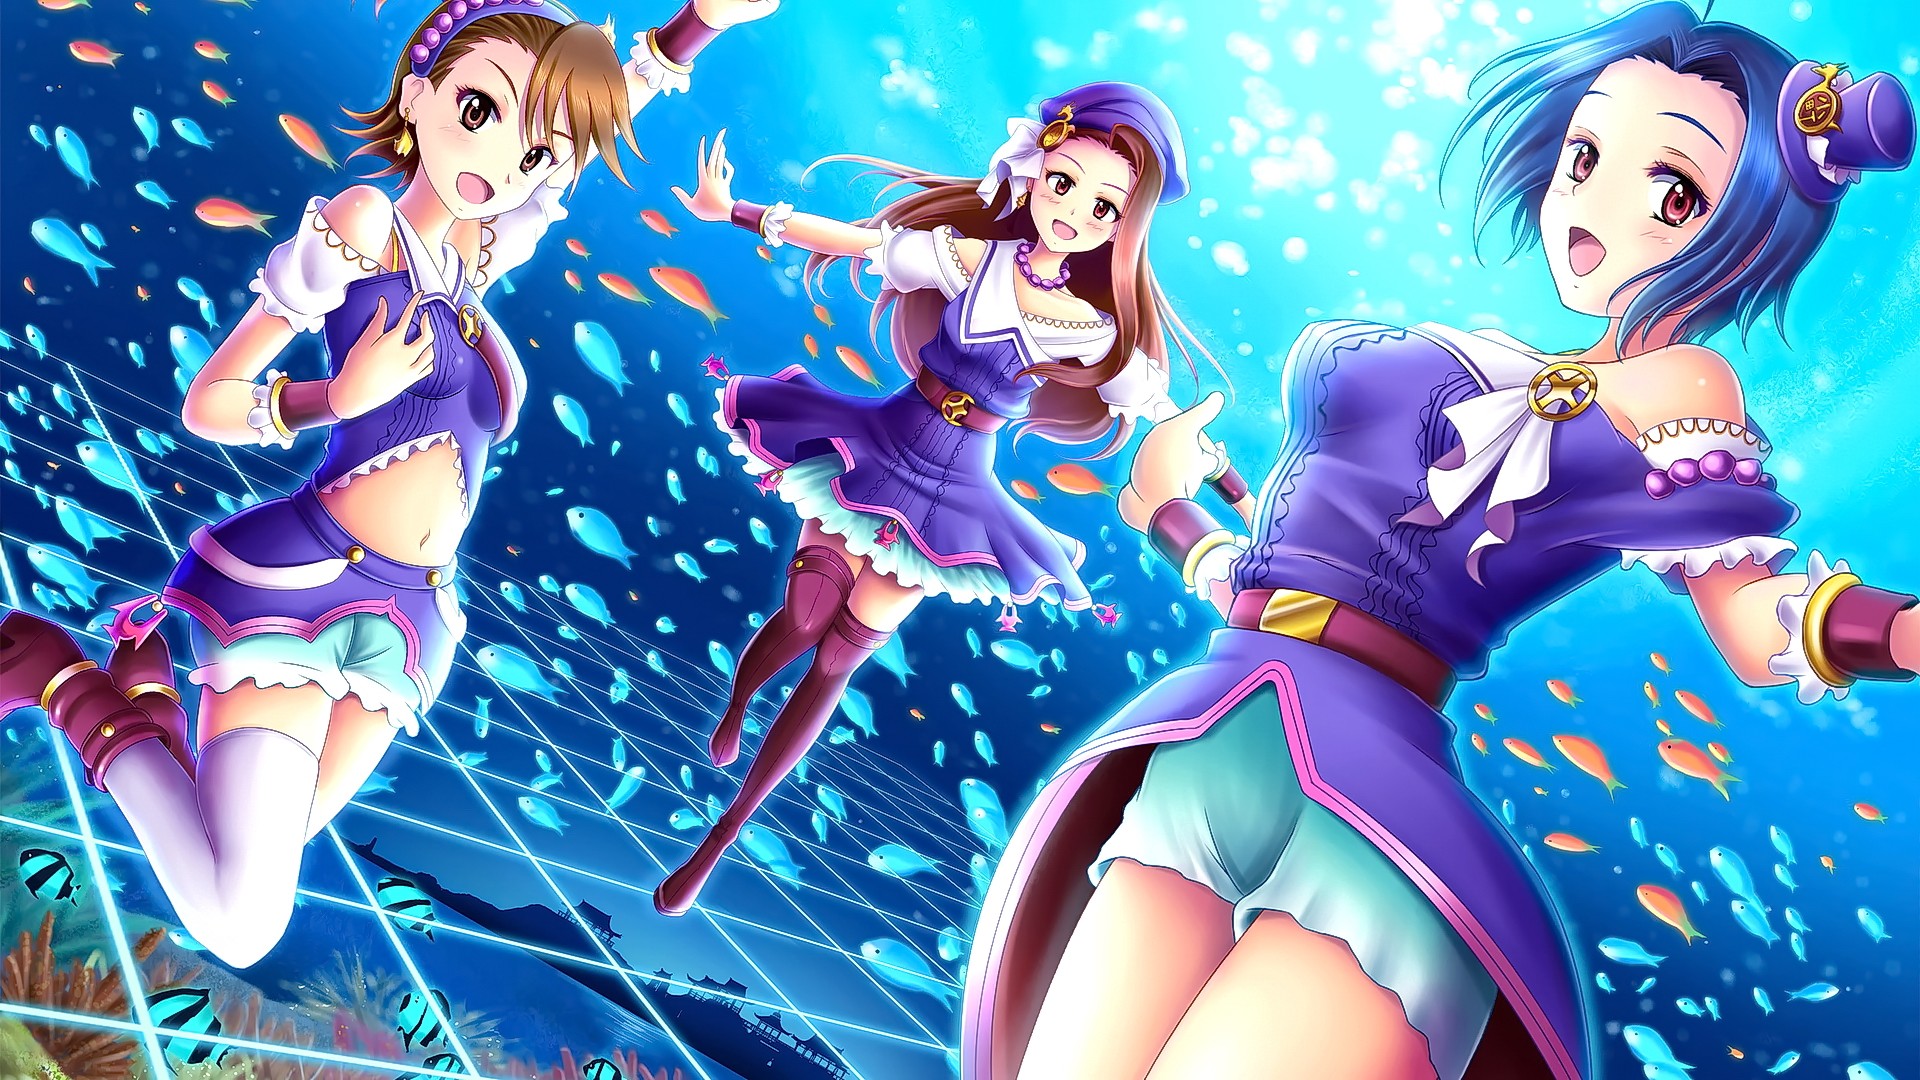 Anime 1920x1080 anime anime girls brunette open mouth smiling looking at viewer THE iDOLM@STER Futami Ami Minase Iori Miura Azusa women trio fantasy girl fantasy art hat funny hats women with hats legs stockings long hair fish